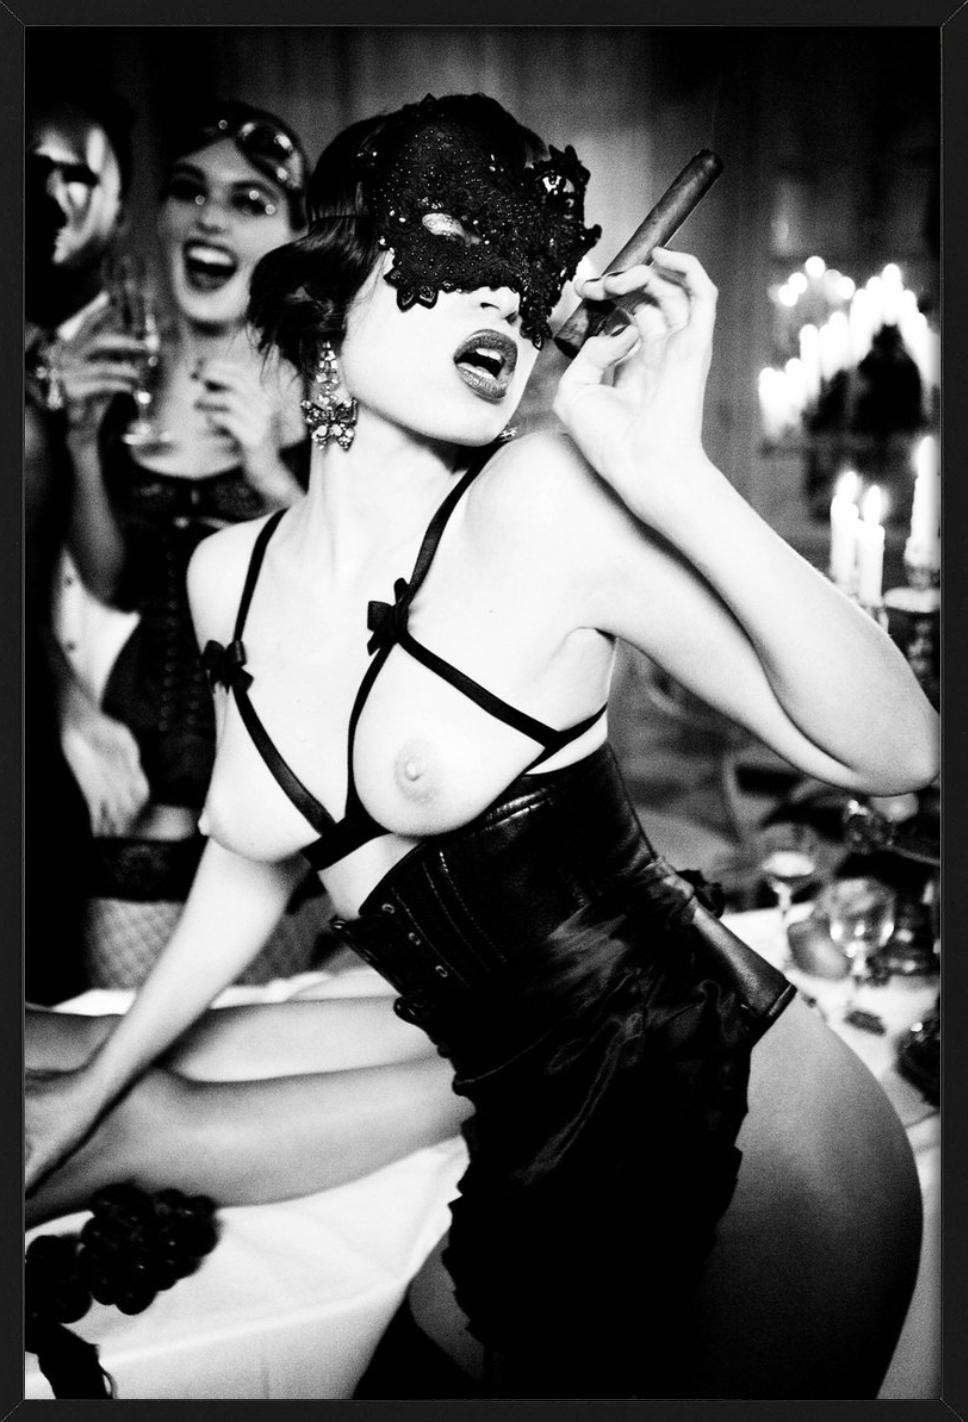 Smoke, The Story of Olga – nude with mask and cigar, fine art photography, 2011 - Contemporary Photograph by Ellen von Unwerth